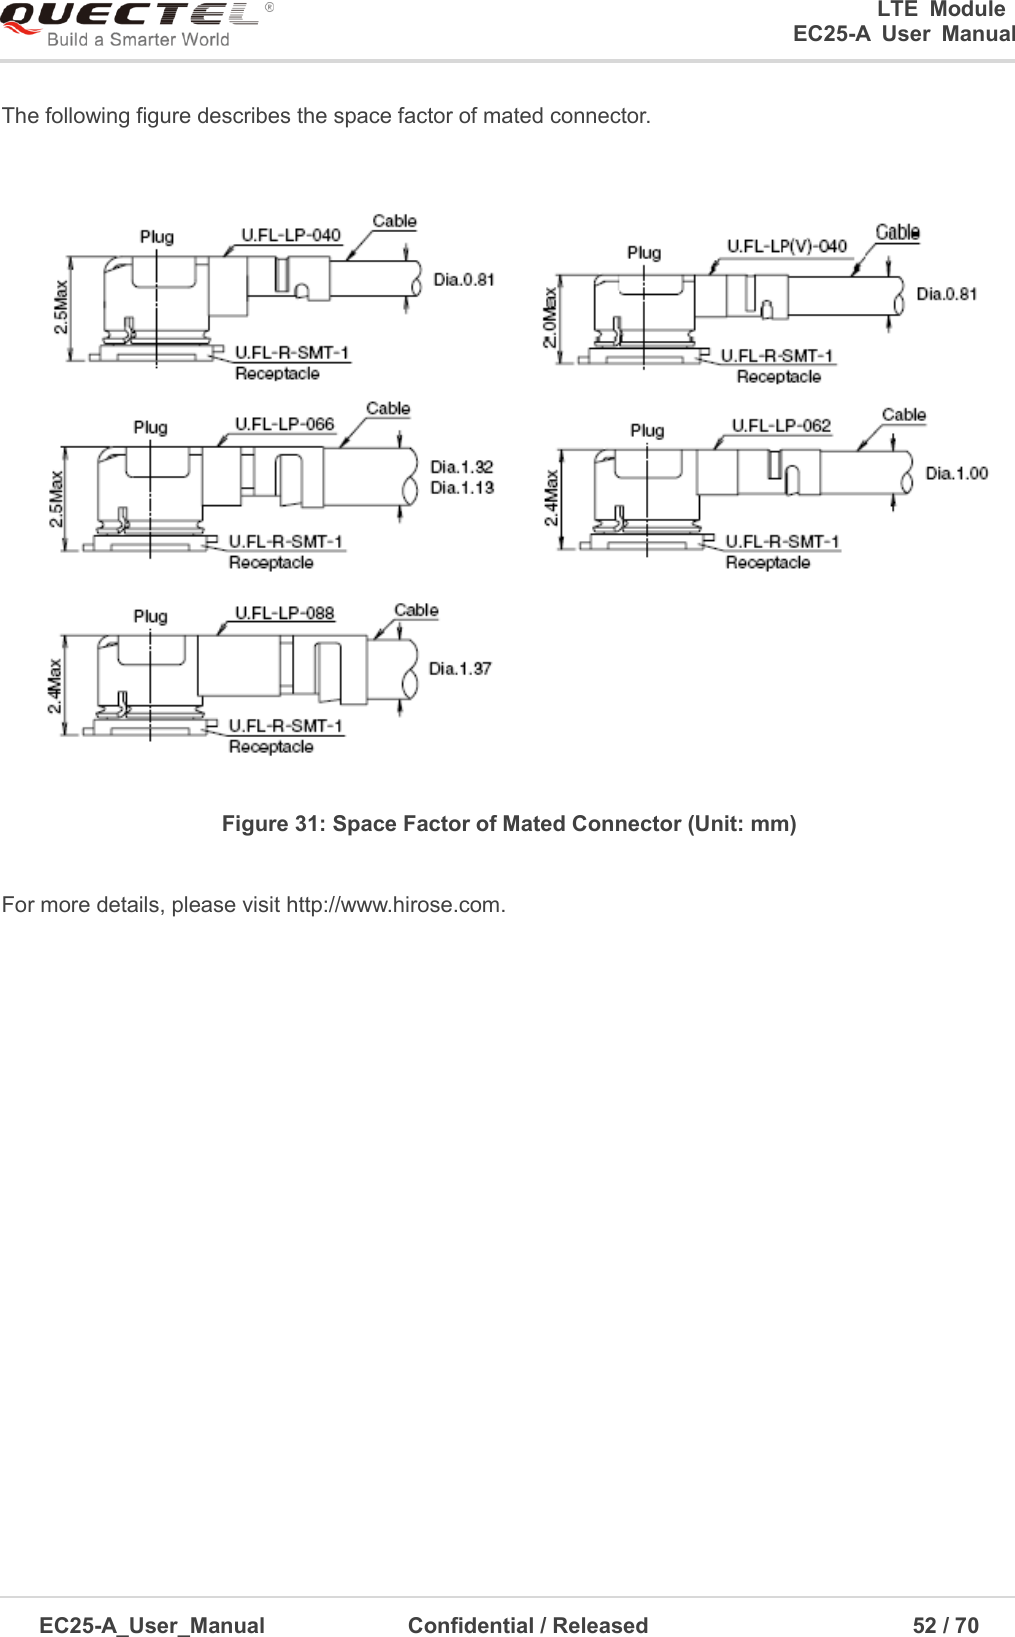 0      LTE  Module      EC25-A  User  Manual EC25-A_User_Manual  Confidential / Released      52 / 7  The following figure describes the space factor of mated connector. Figure 31: Space Factor of Mated Connector (Unit: mm) For more details, please visit http://www.hirose.com. 